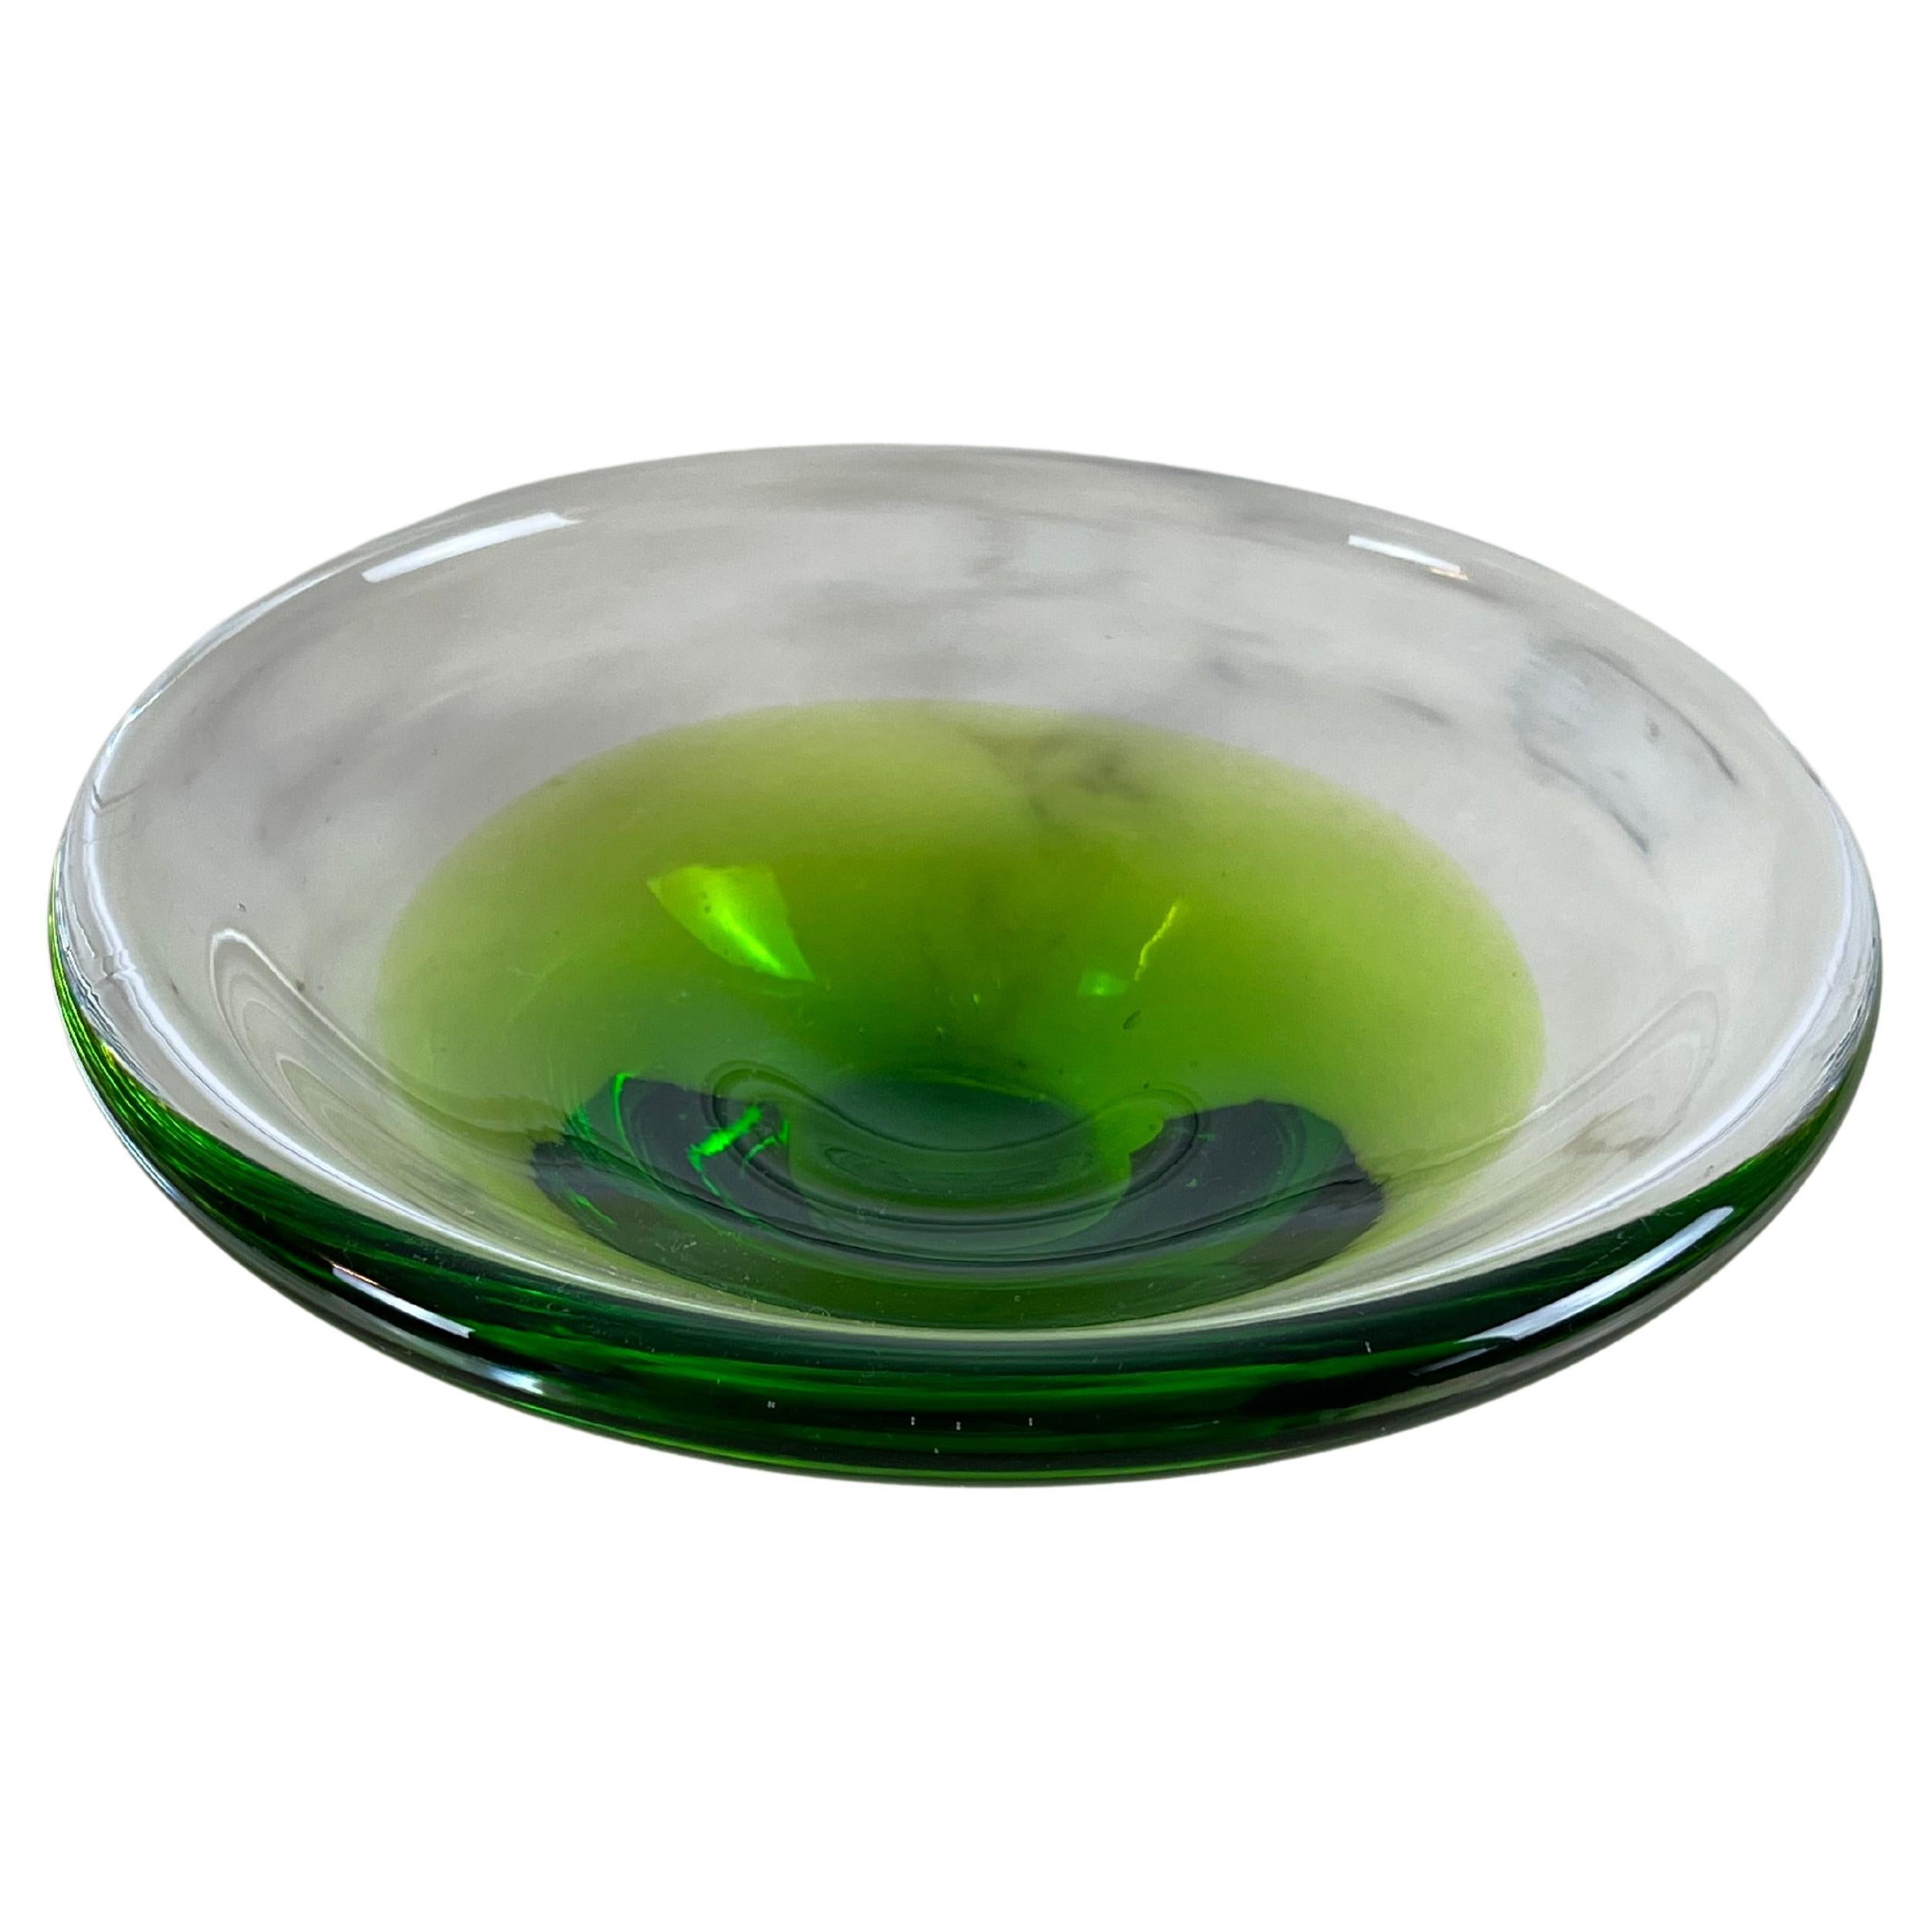 Ashtray / Pocket Tray in Submerged Murano Glass, Italy, 1970 For Sale